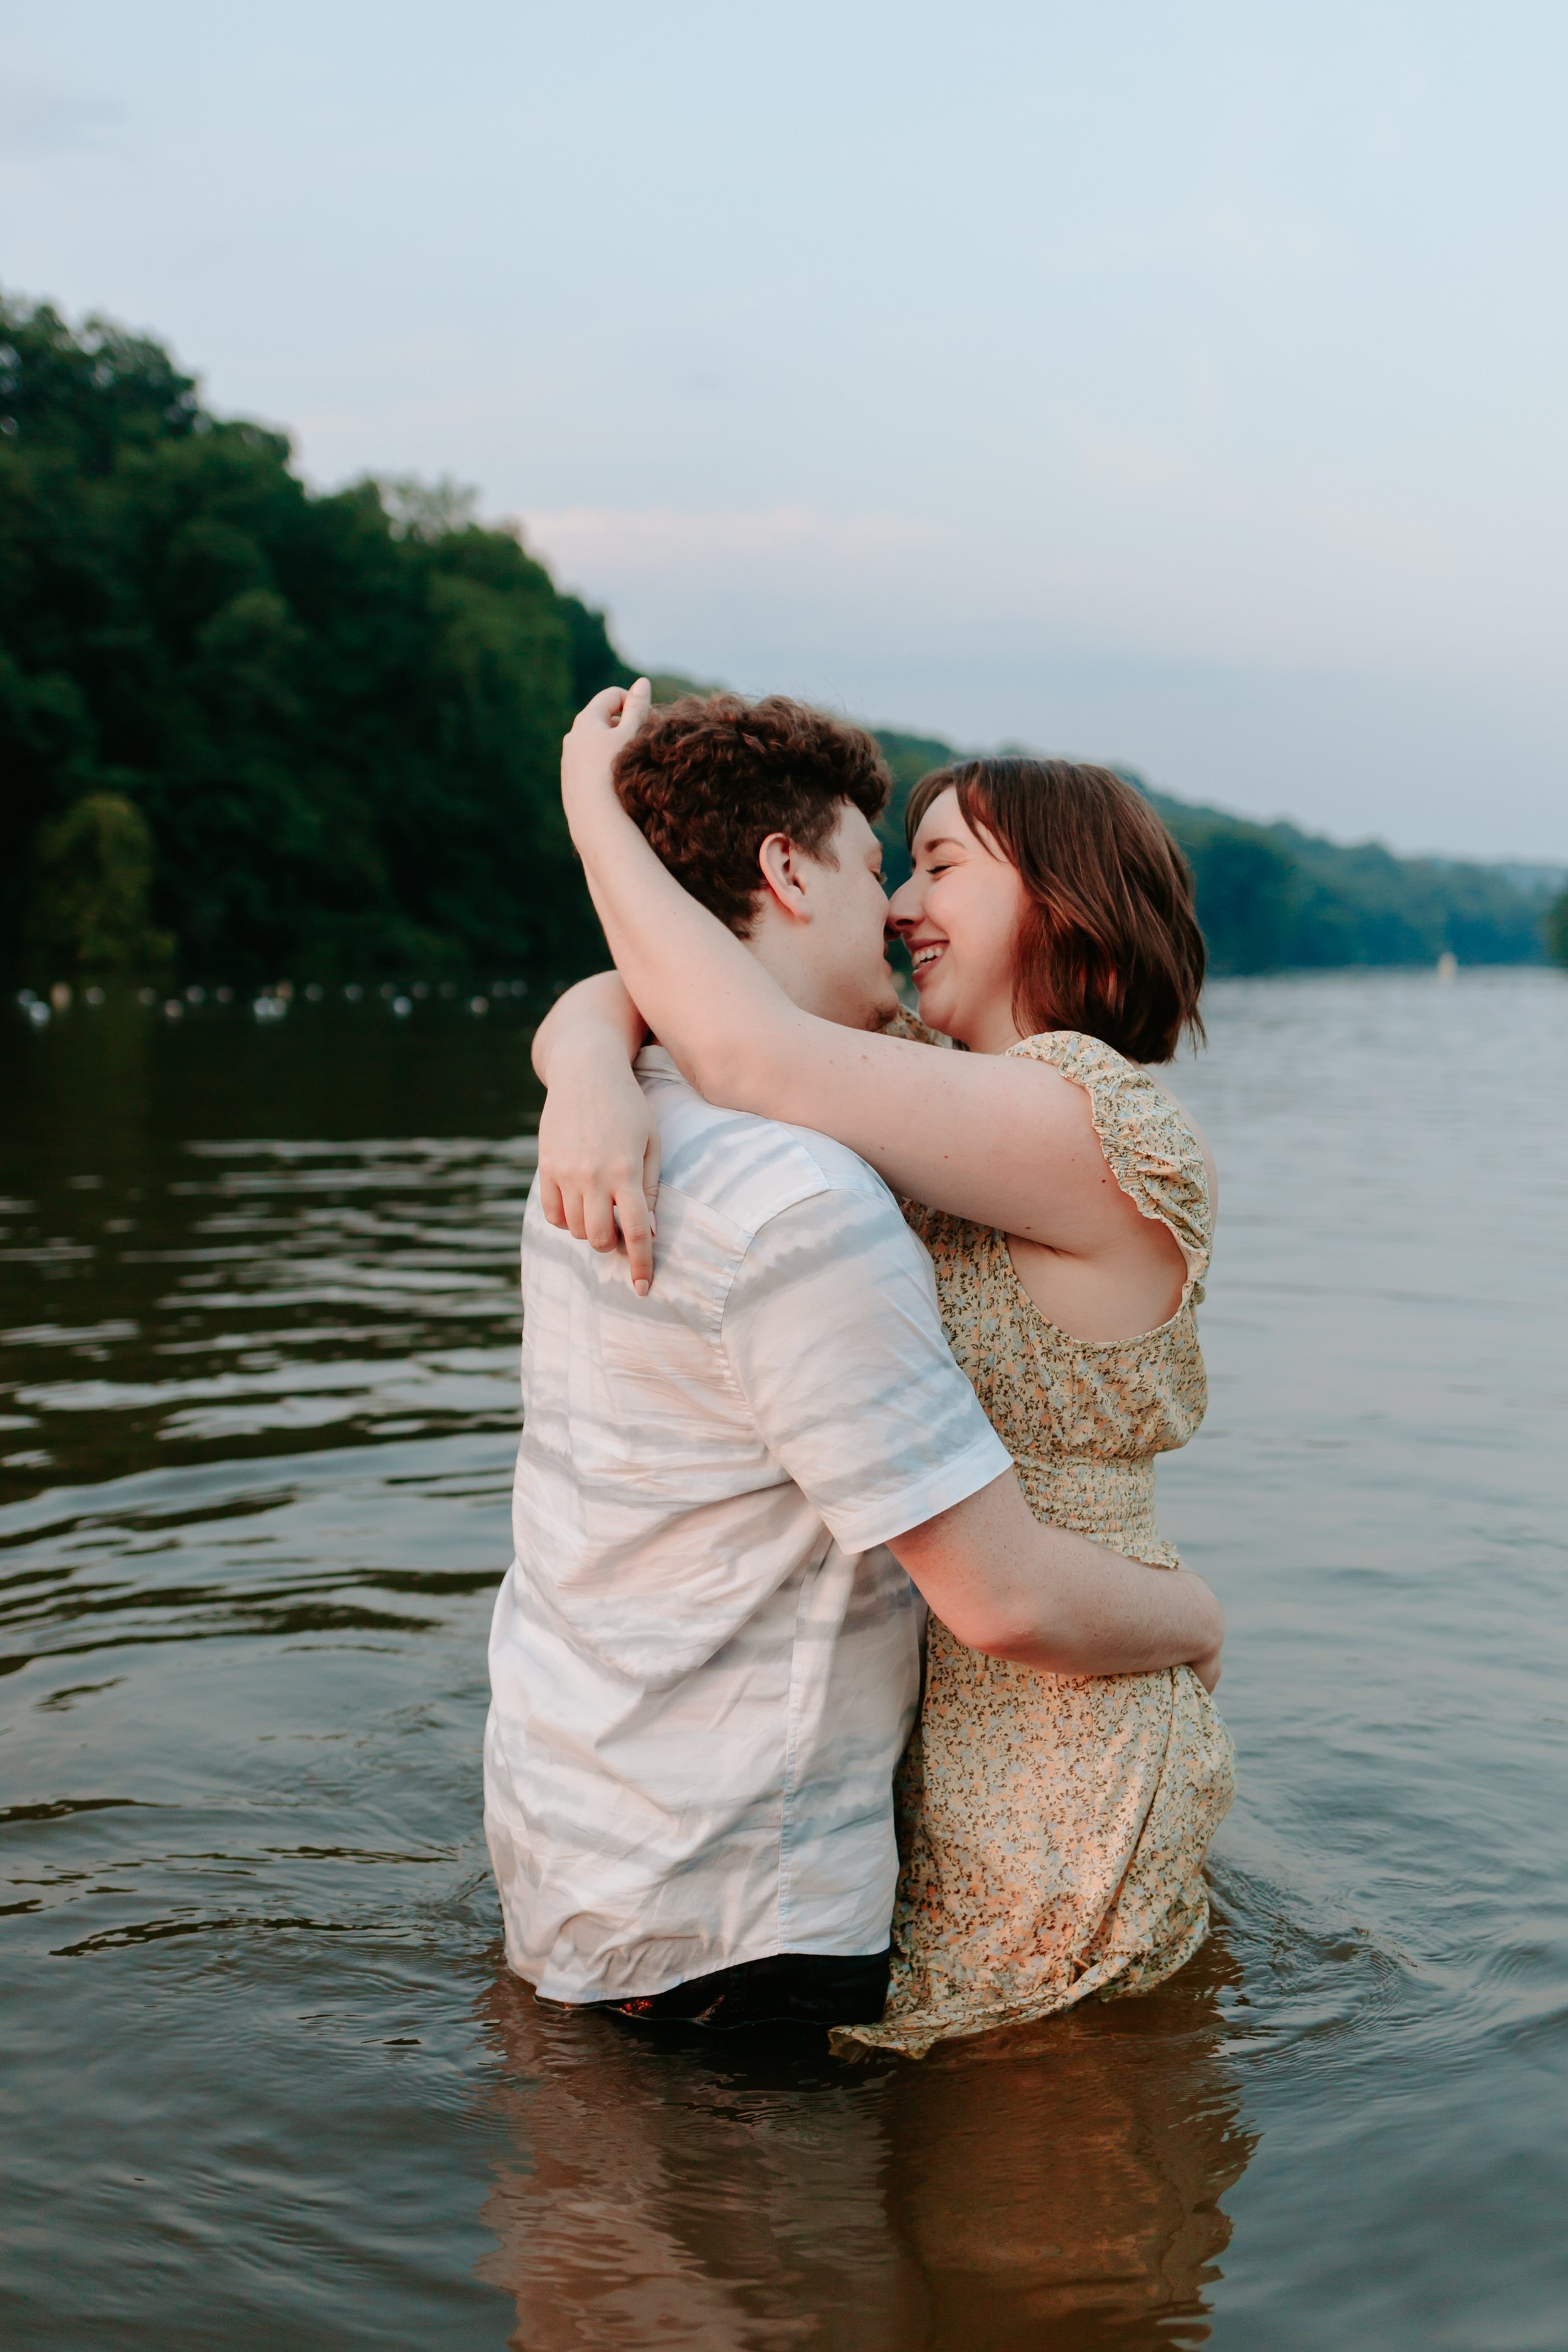 Couple embraces while standing in lake.